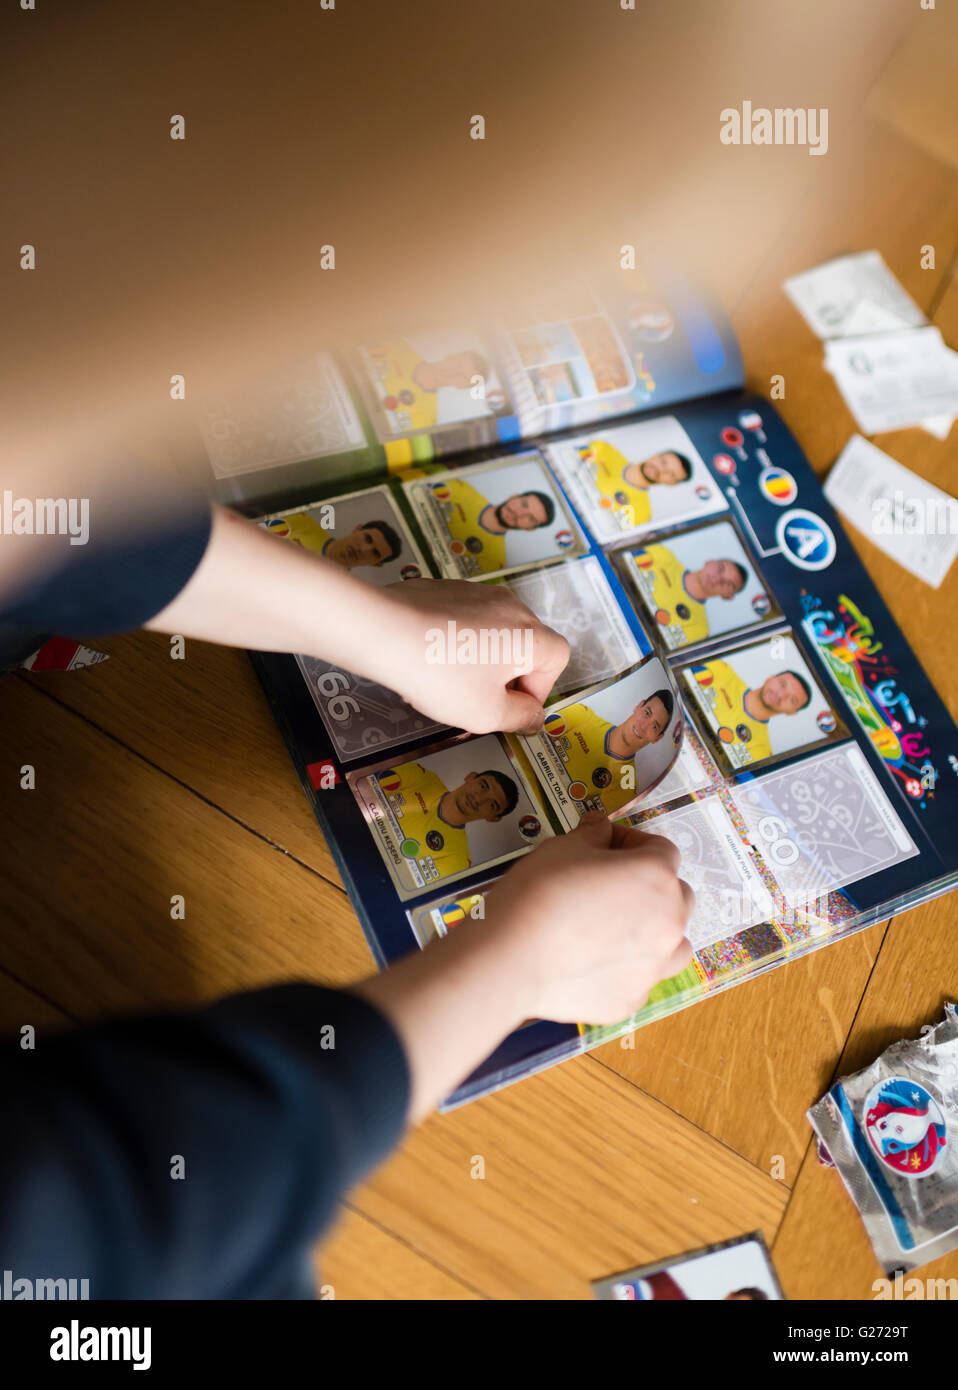 An 8 year old boy is pasting UEFA Euro 2016 Panini football trading cards into his sticker collection scrapbook. Stock Photo